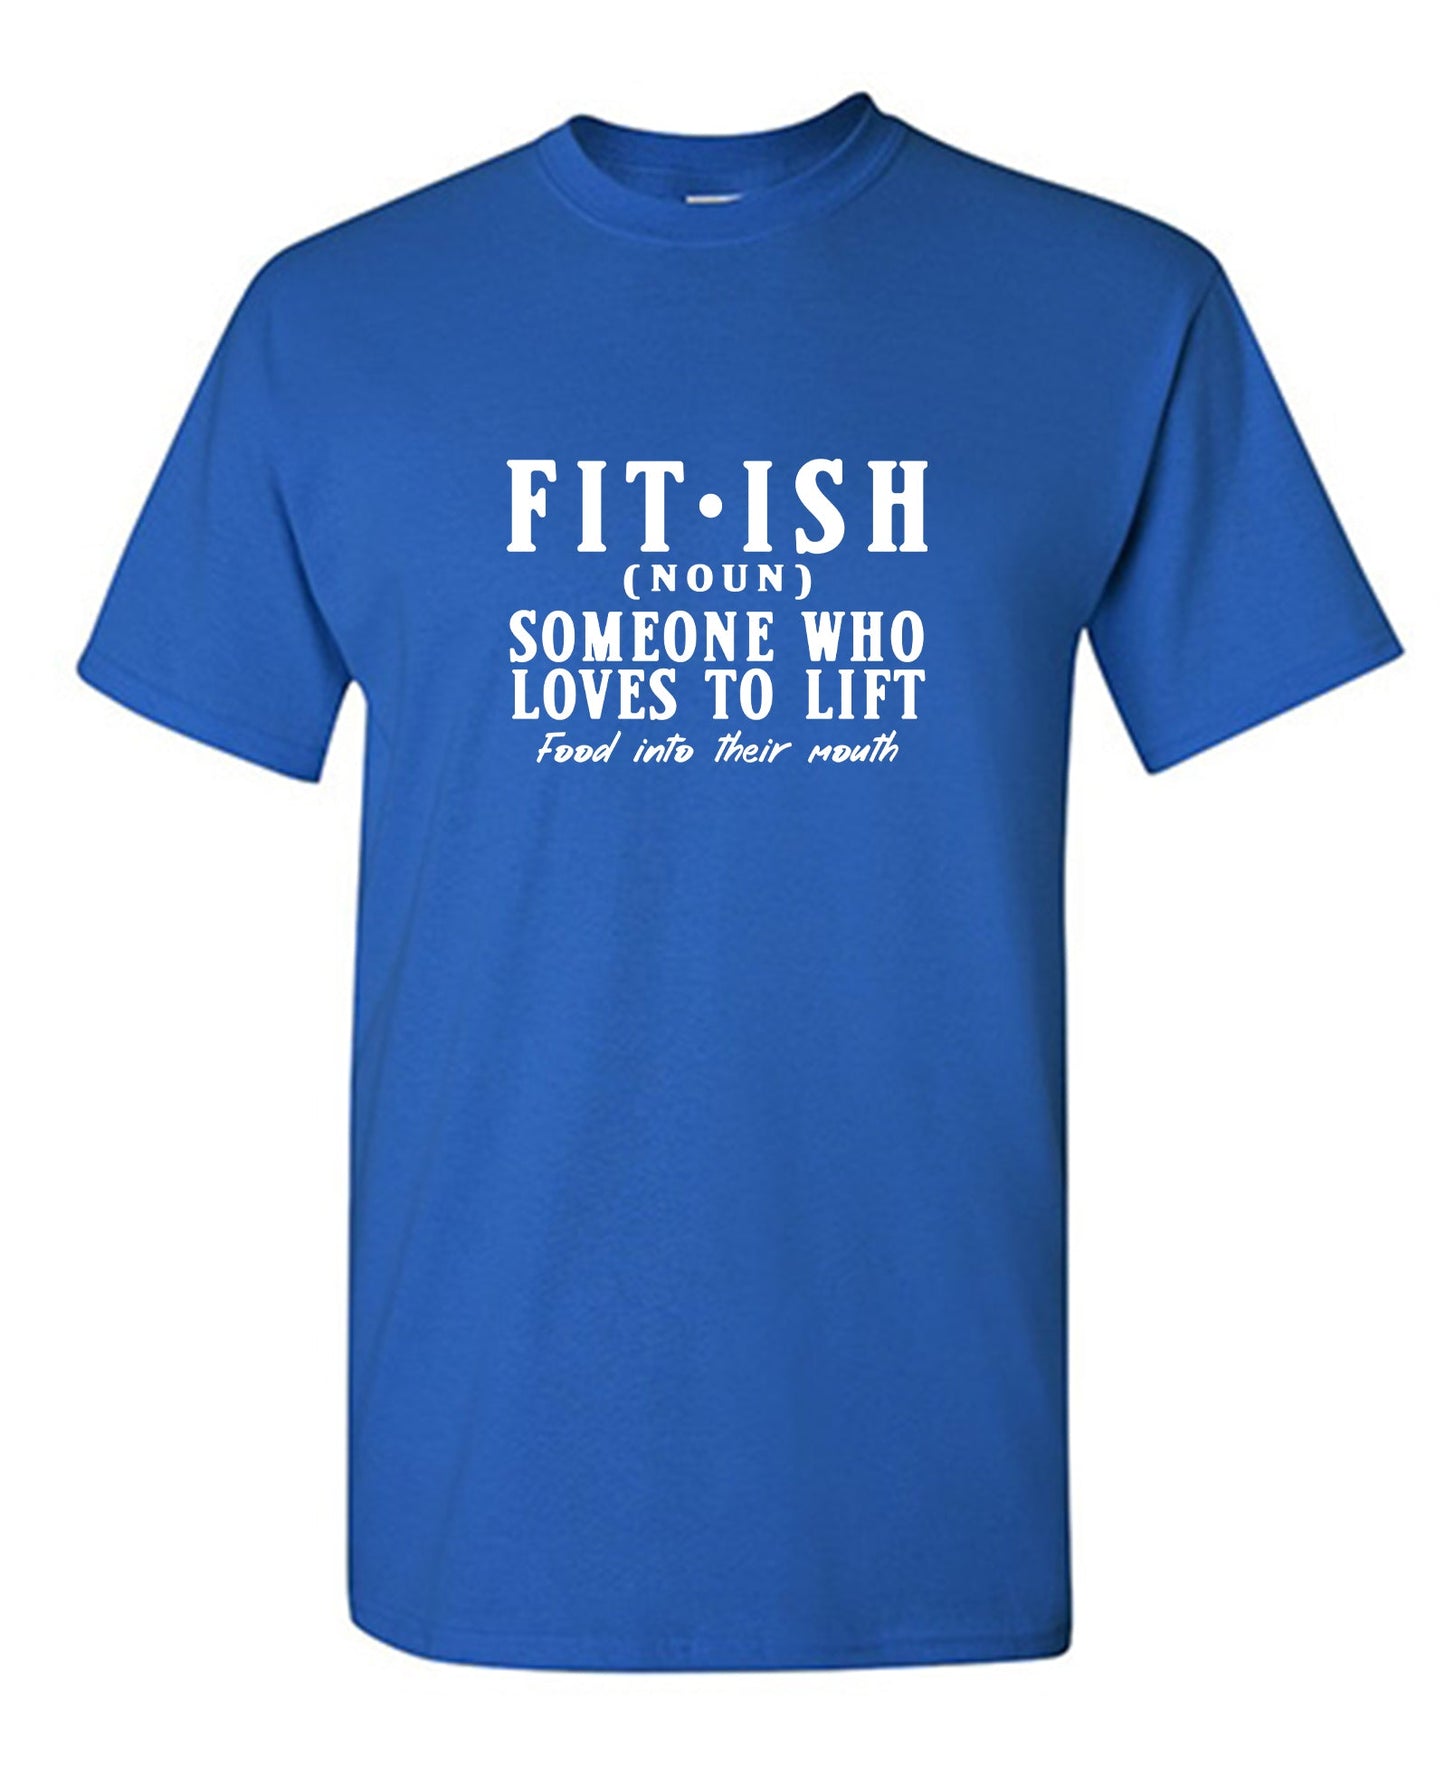 Fit-Ish, Someone who Loves to Lift, food into their mouth Funny Tee